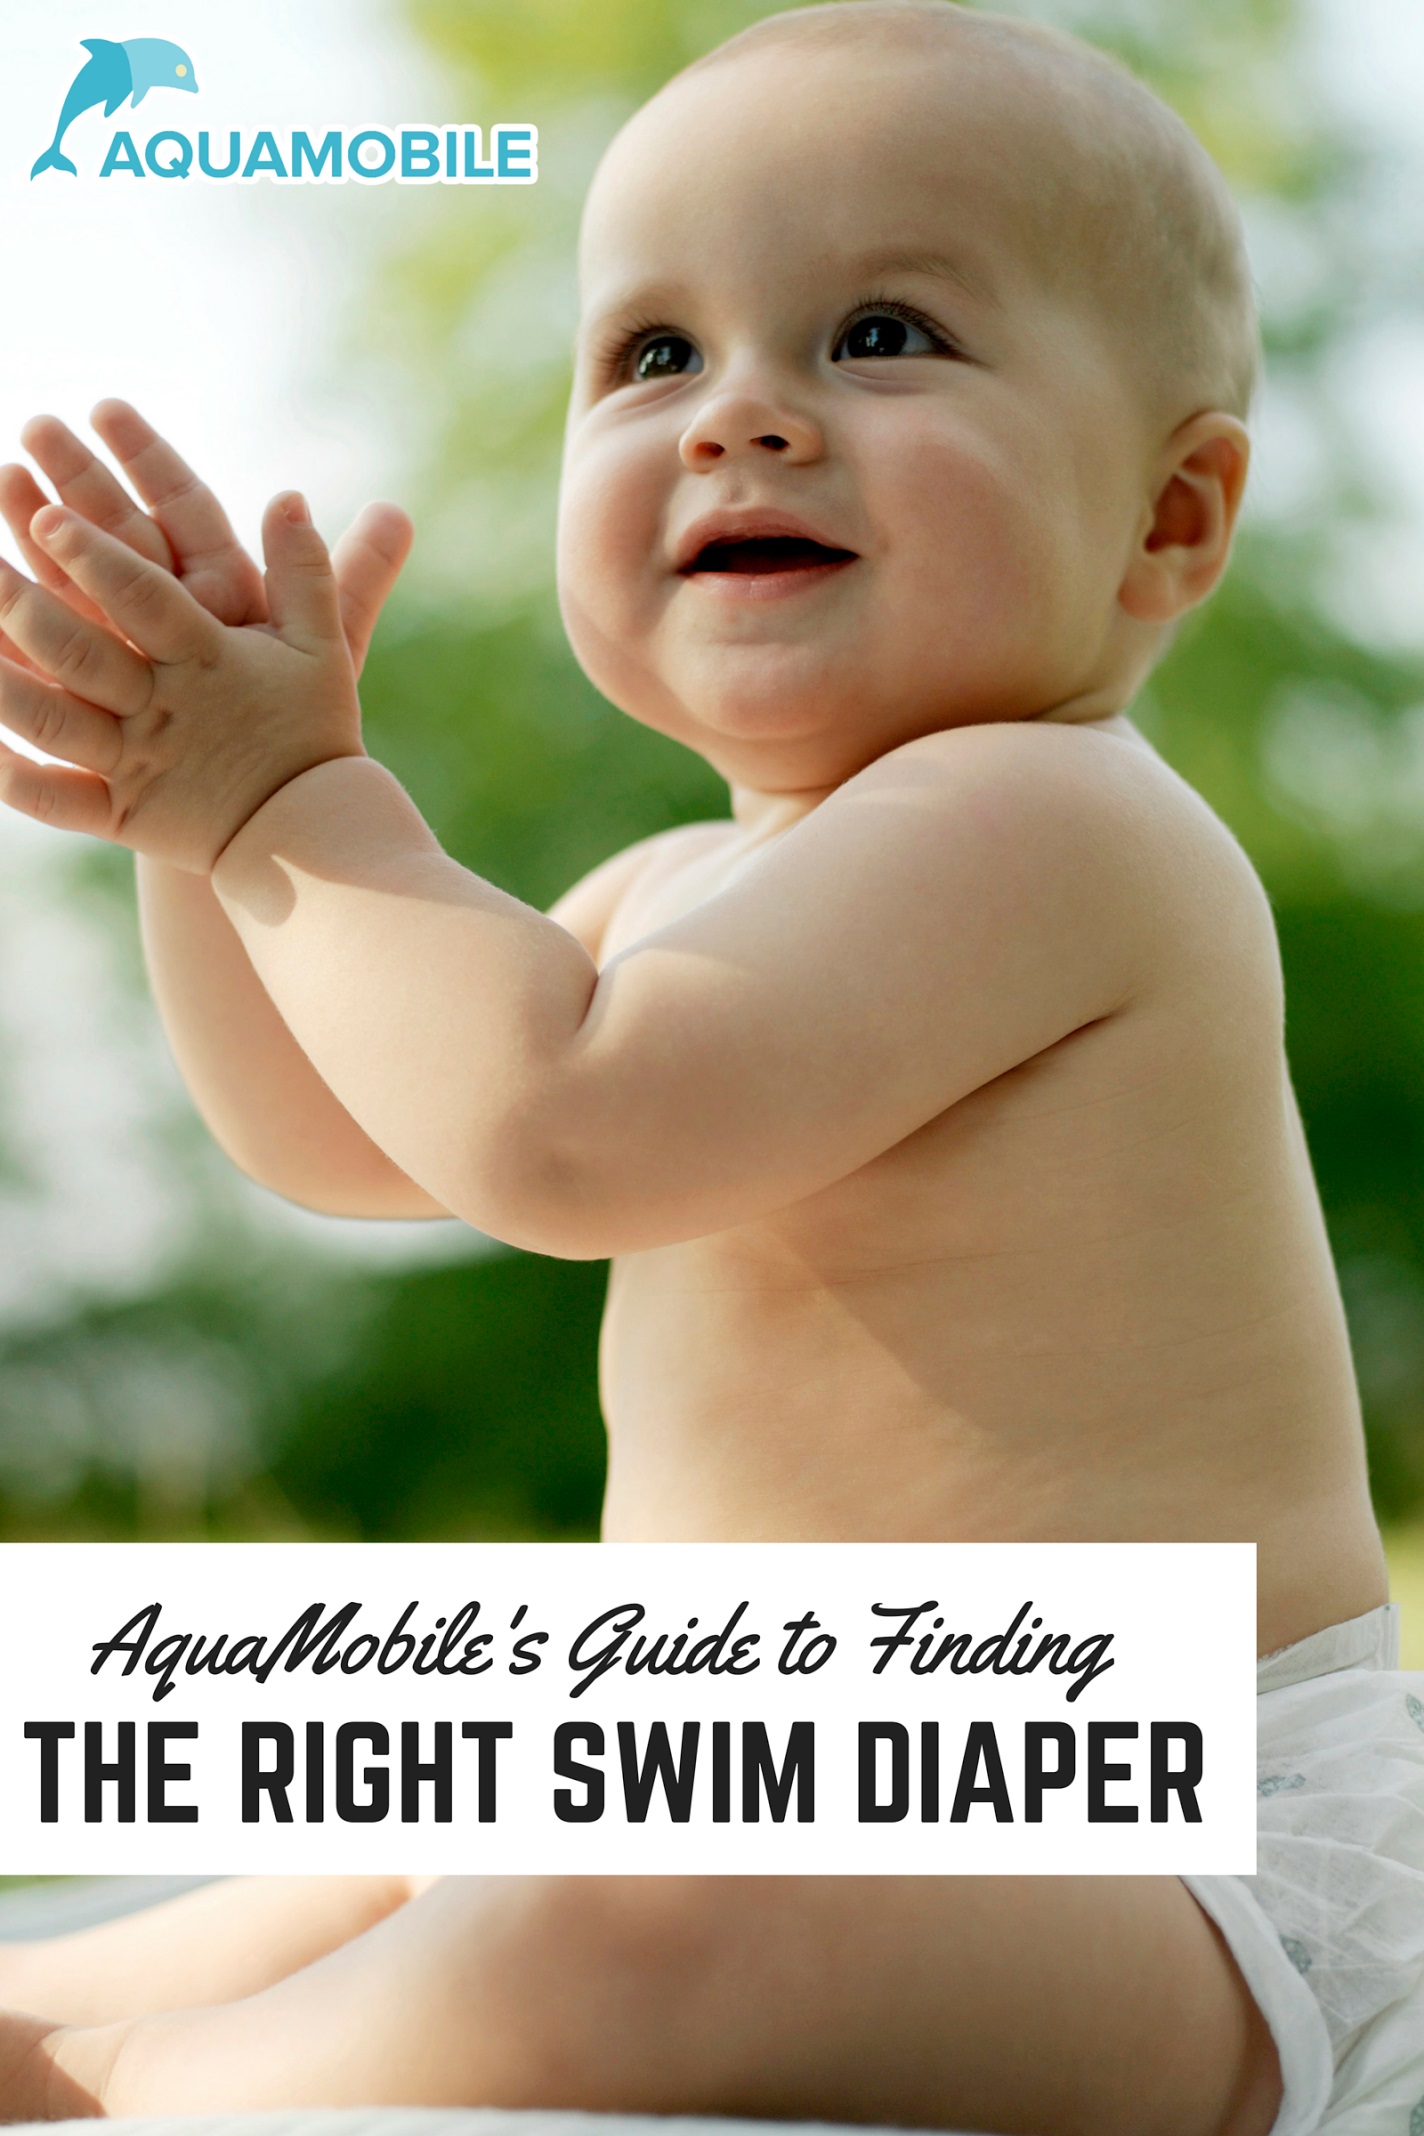 Guide to Finding the Right Swim Diaper